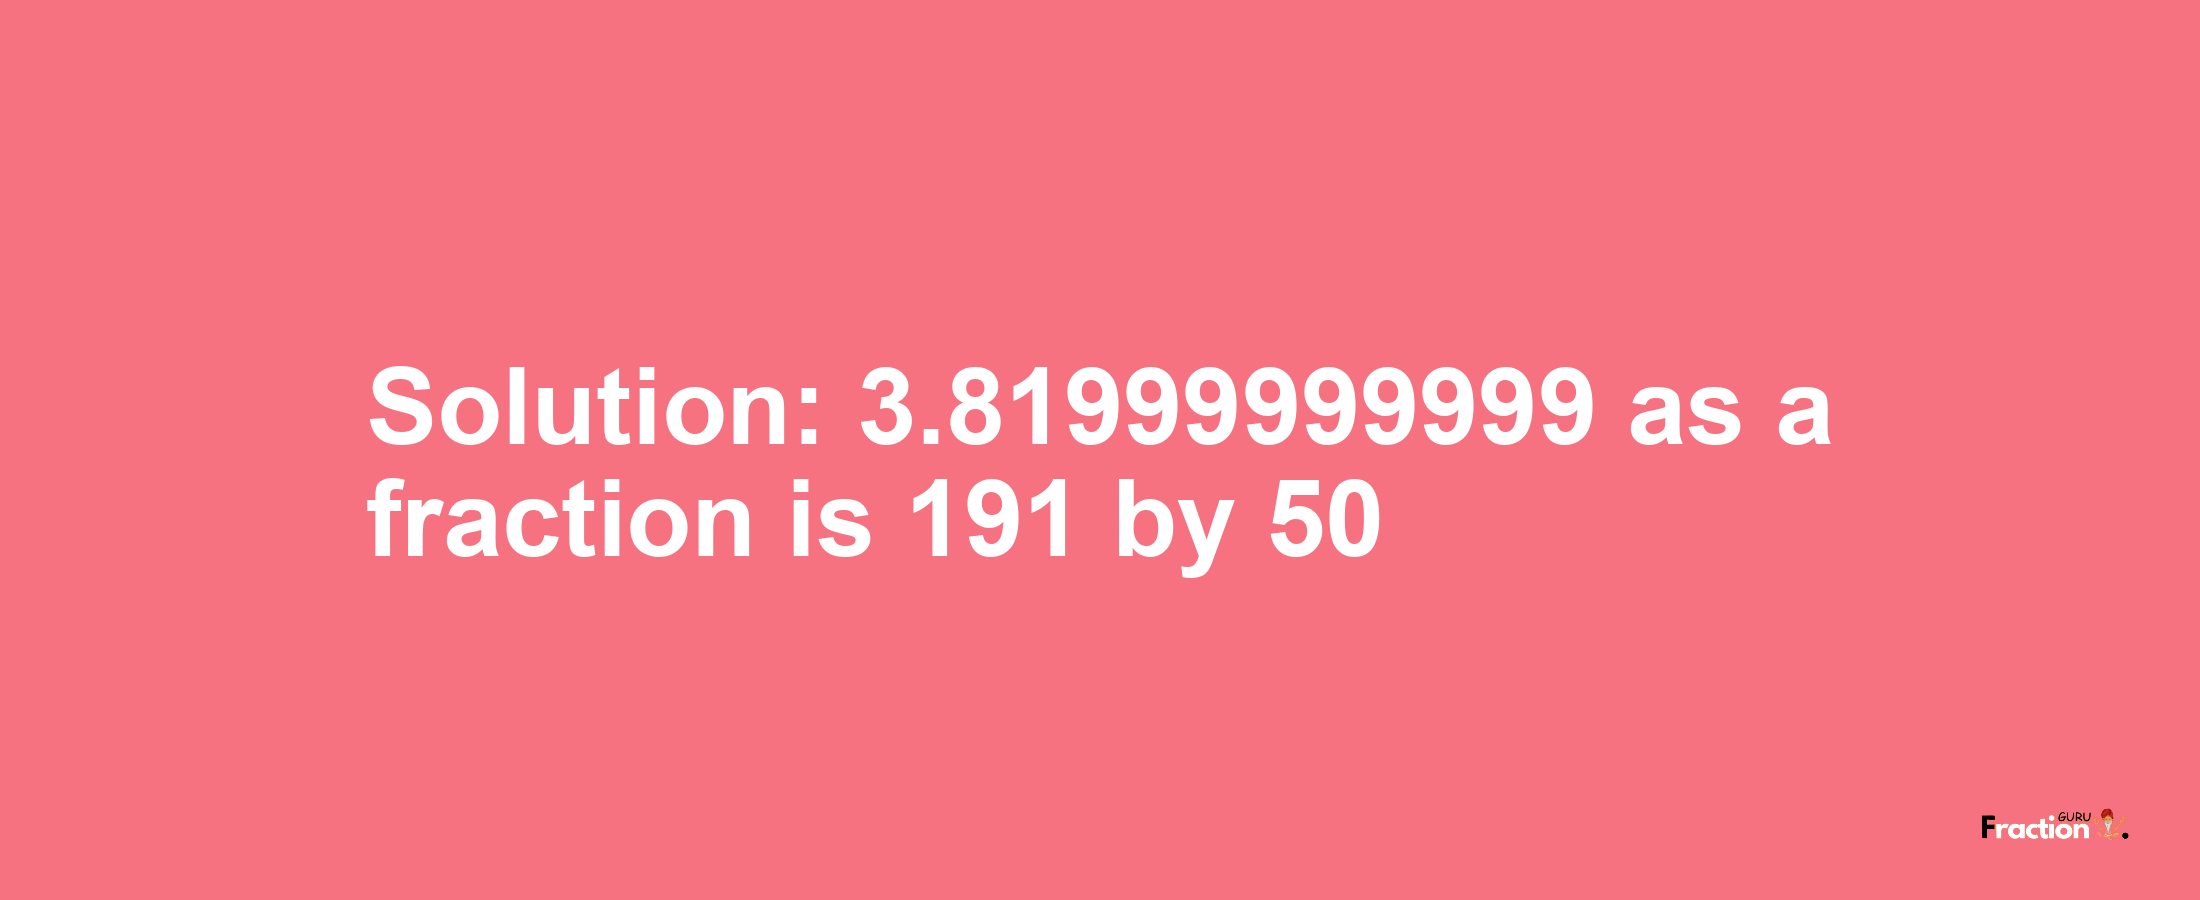 Solution:3.81999999999 as a fraction is 191/50